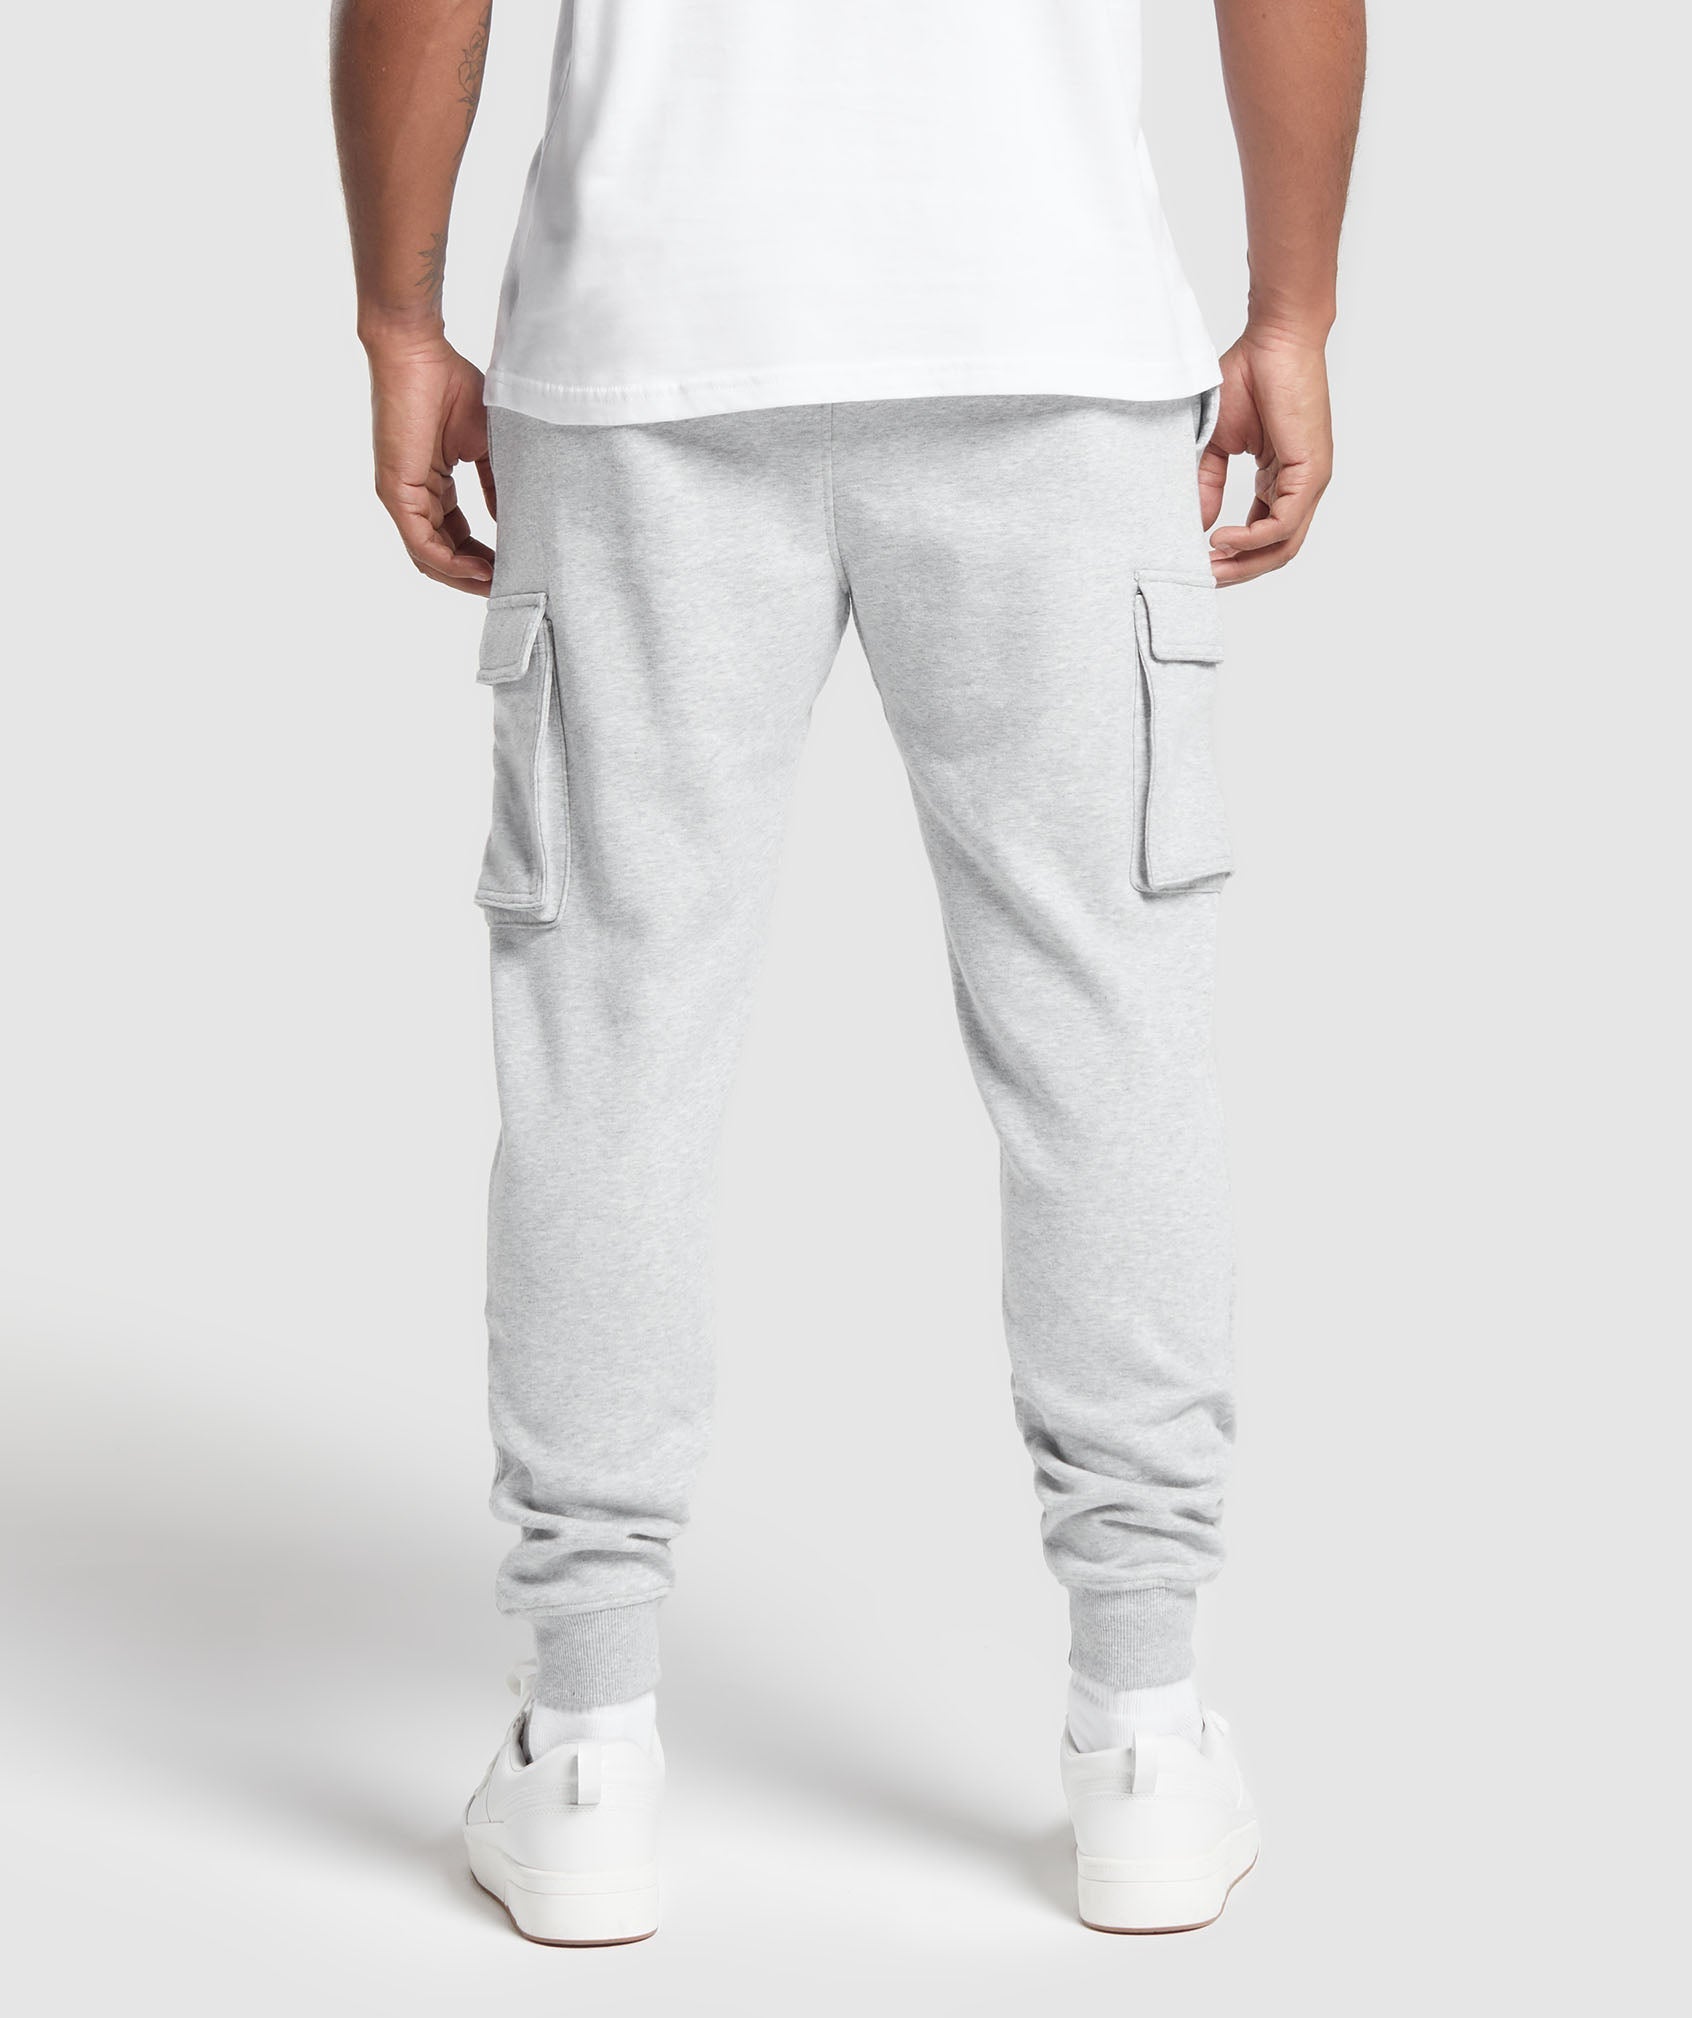 Crest Cargo Joggers in Light Grey Marl - view 3